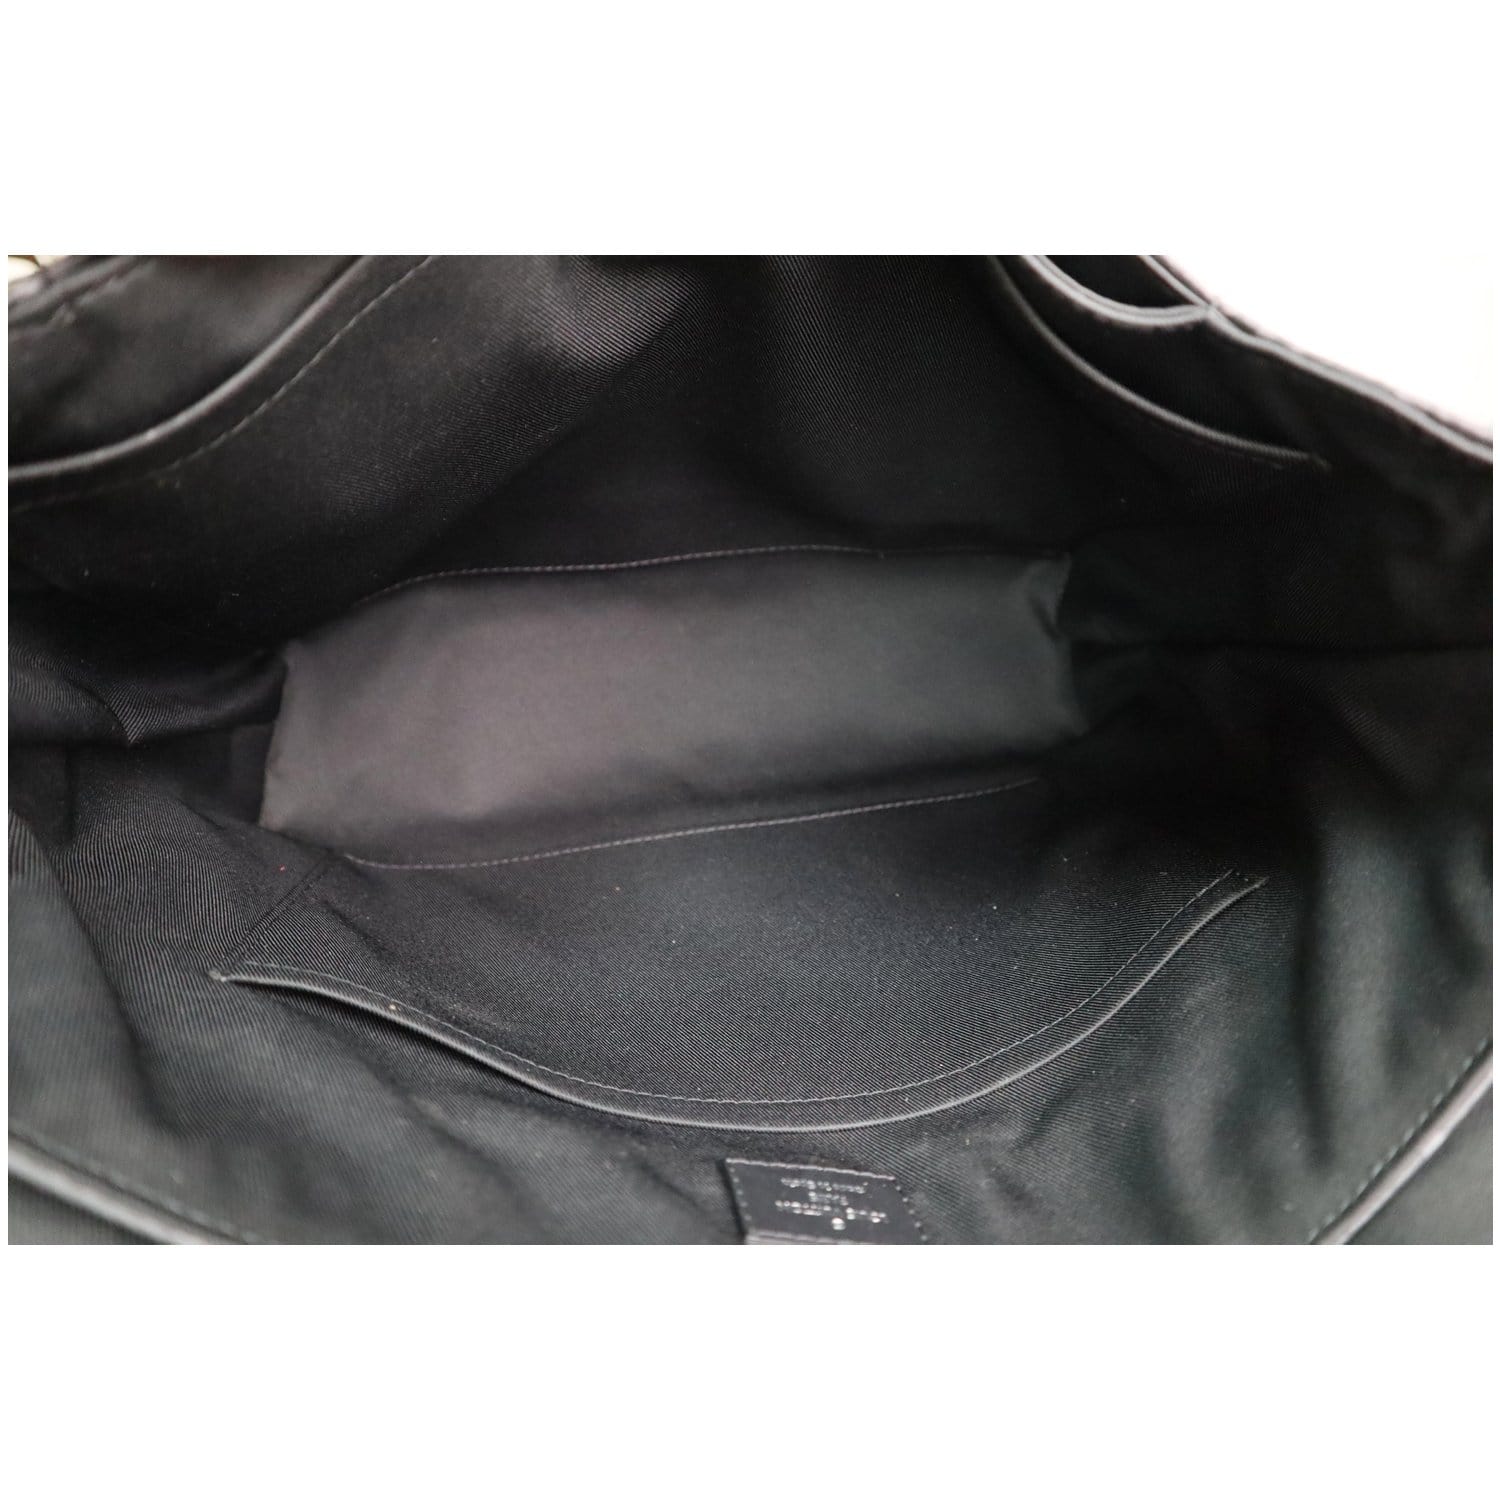 District leather bag Louis Vuitton Black in Leather - 35132478